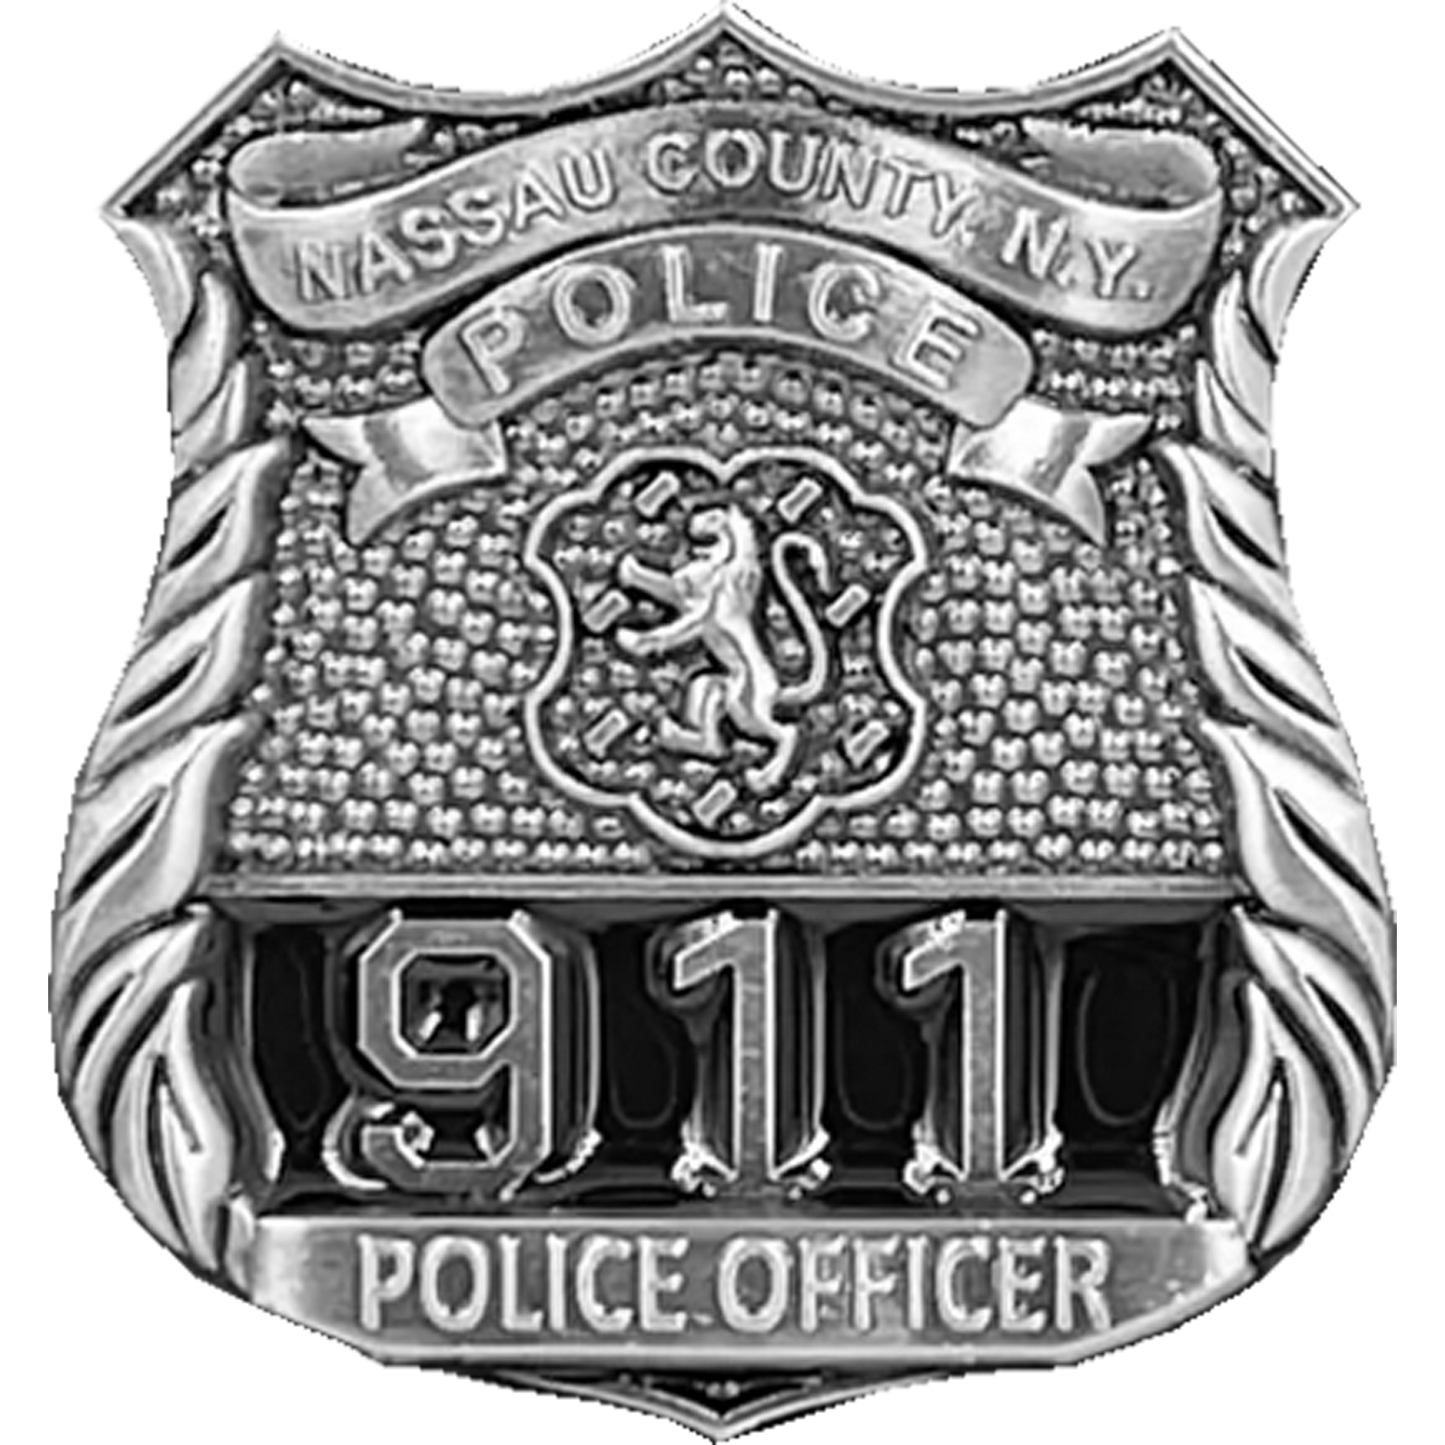 PBX-003-D Nassau County NY Police Department NCPD Police Officer Long Island LINY nickel plated metal lapel pin